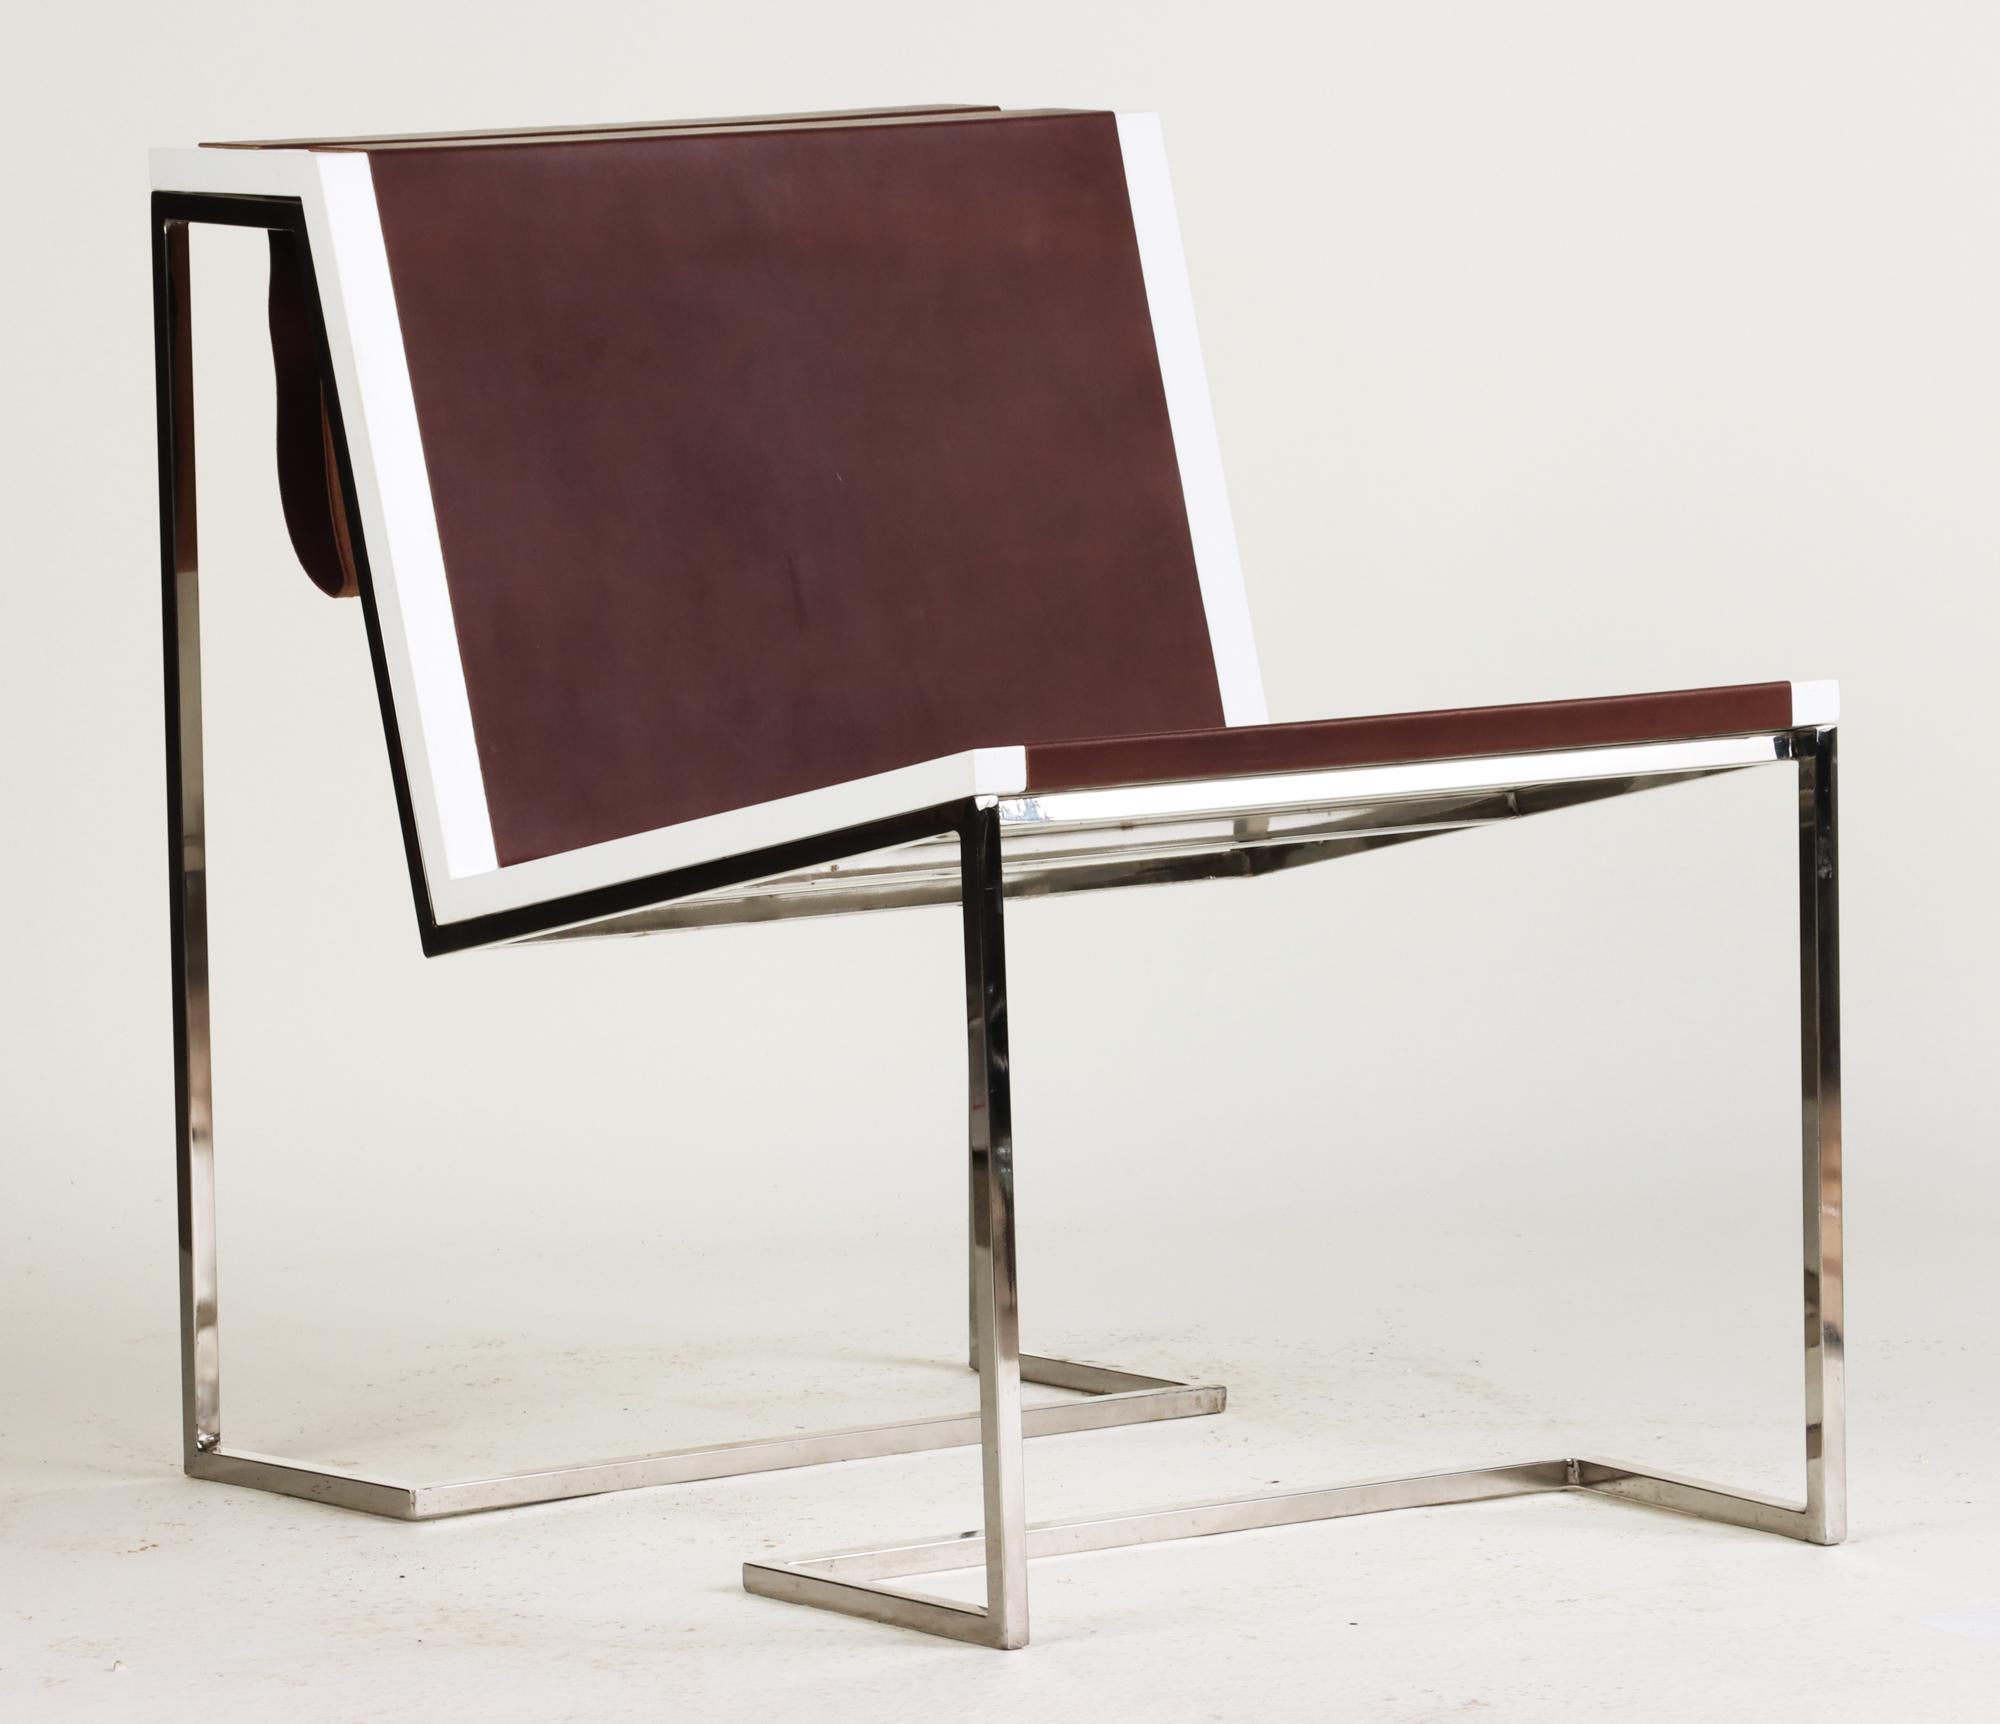 A Bauhaus inspired, contemporary occasional chair with high polished stainless steel base and brown leather seat detail. Leather forms a sling to store books and magazines.